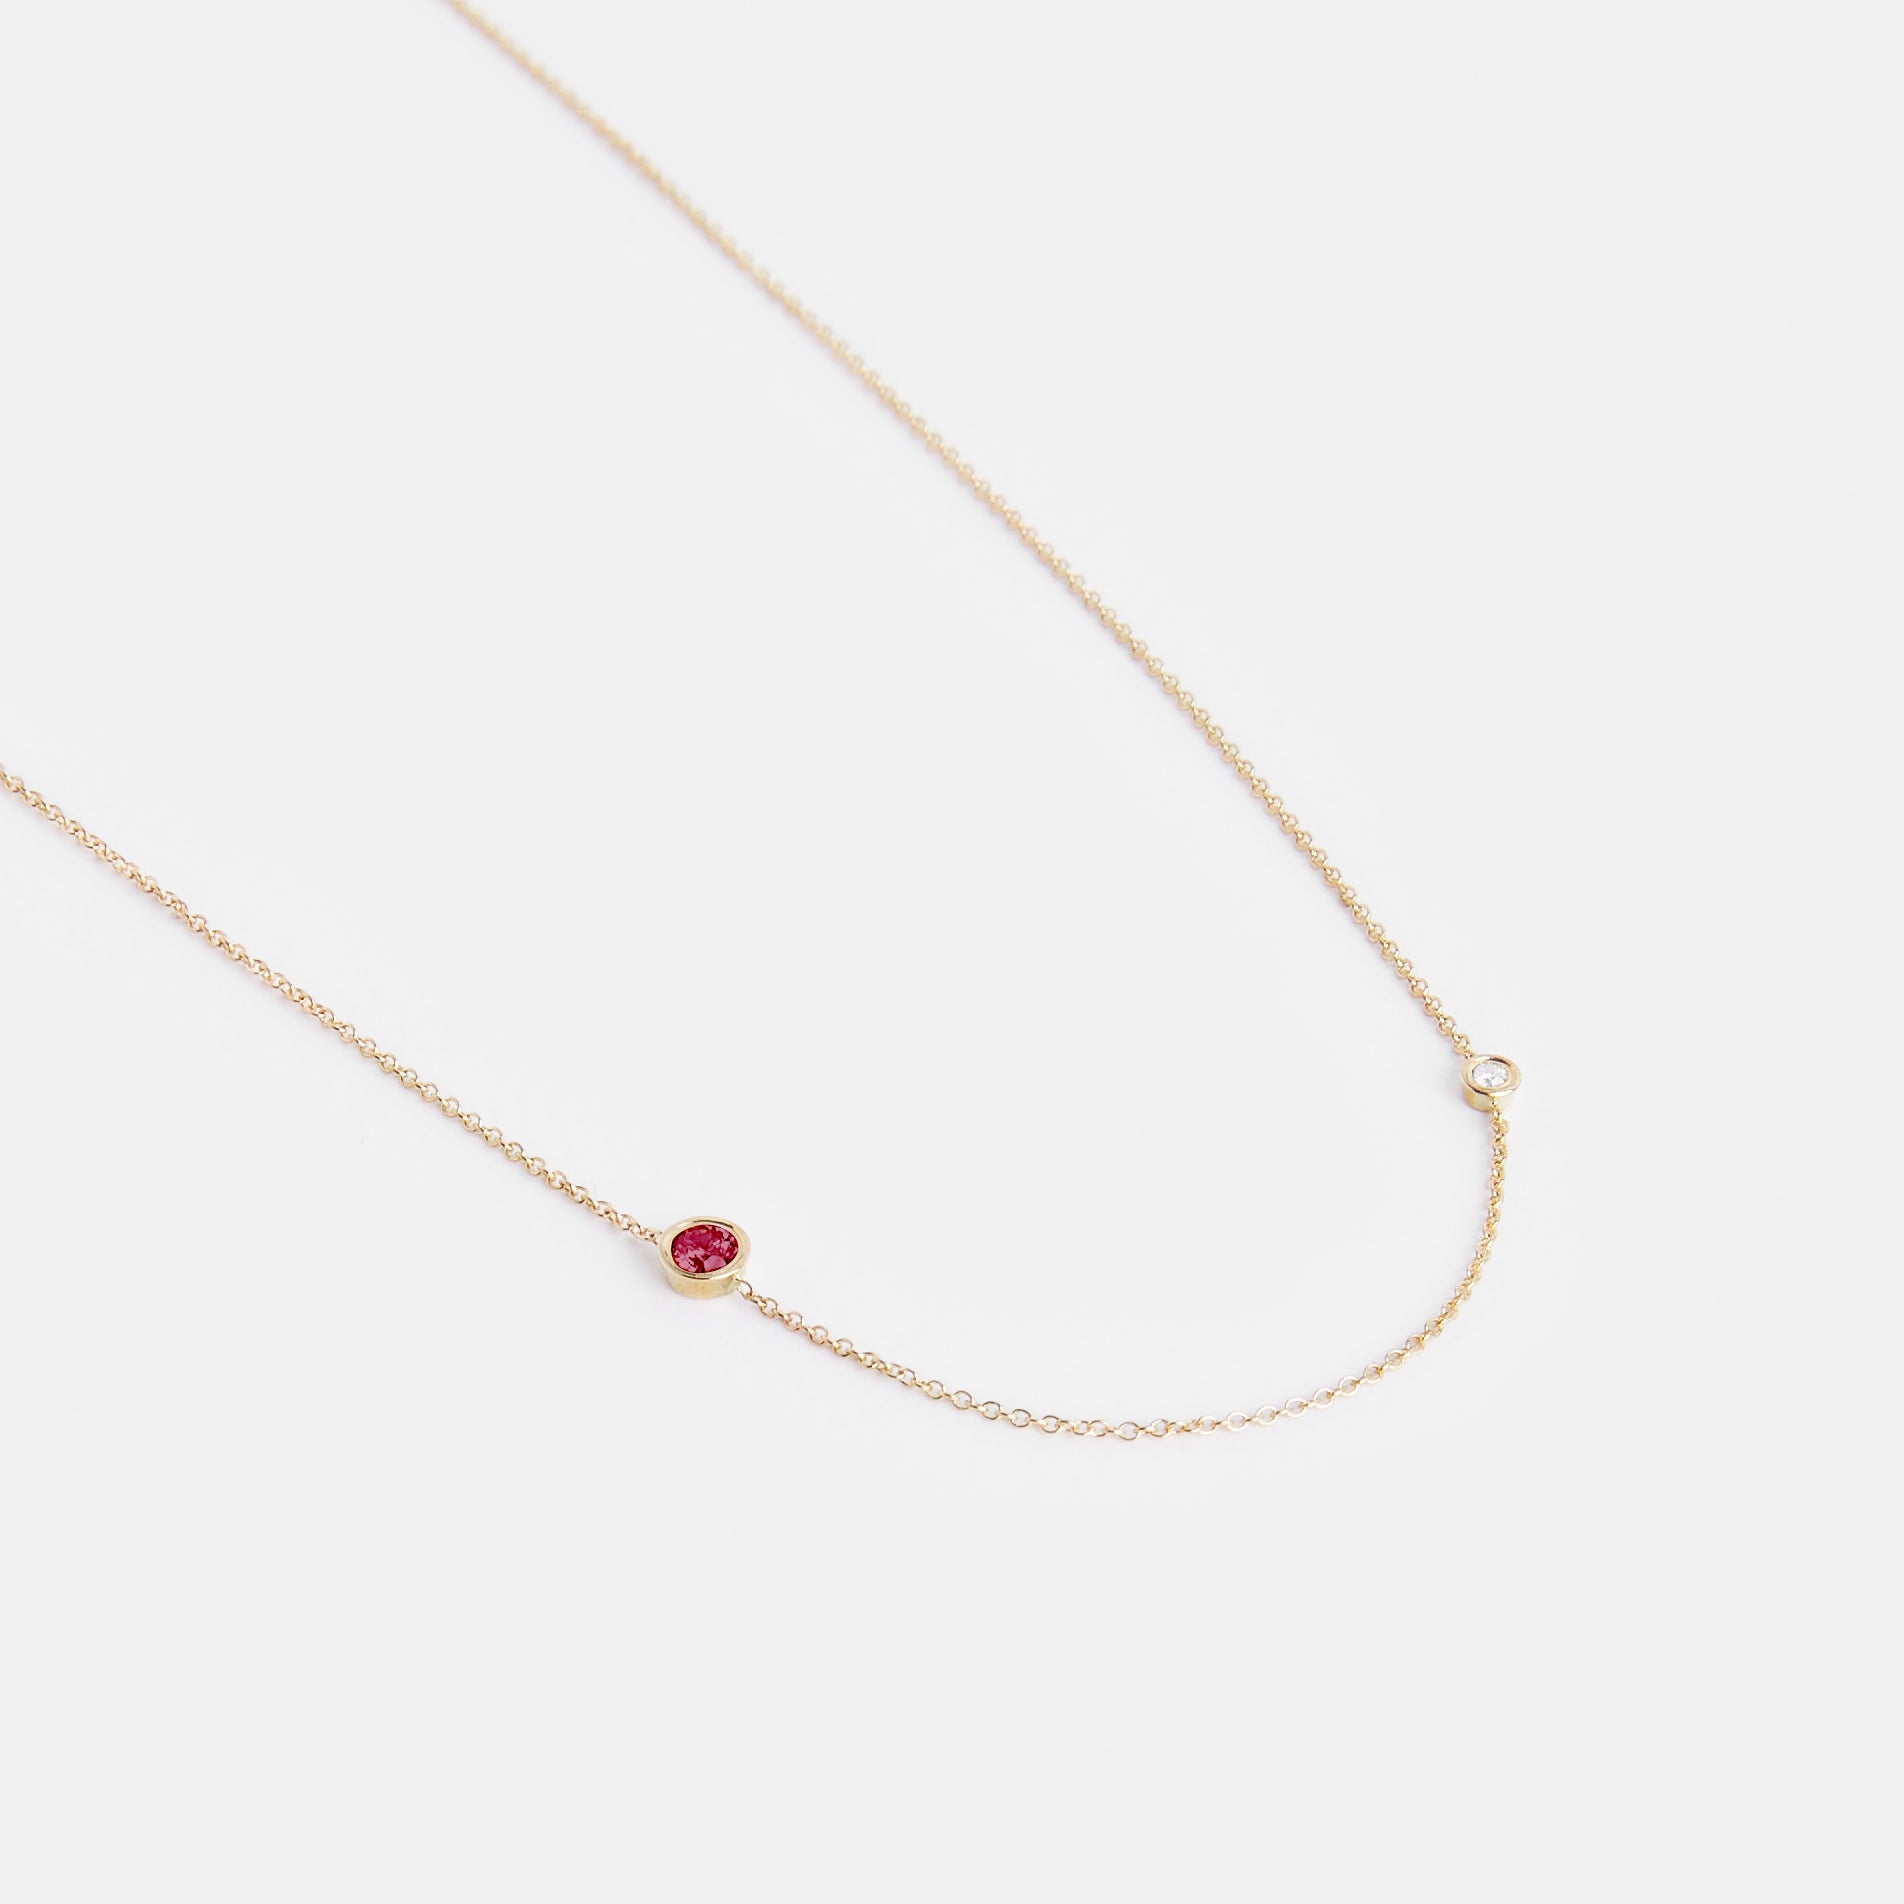 Iba Simple Necklace in 14k Gold set with White Diamonds and Ruby By SHW Fine Jewelry NYC